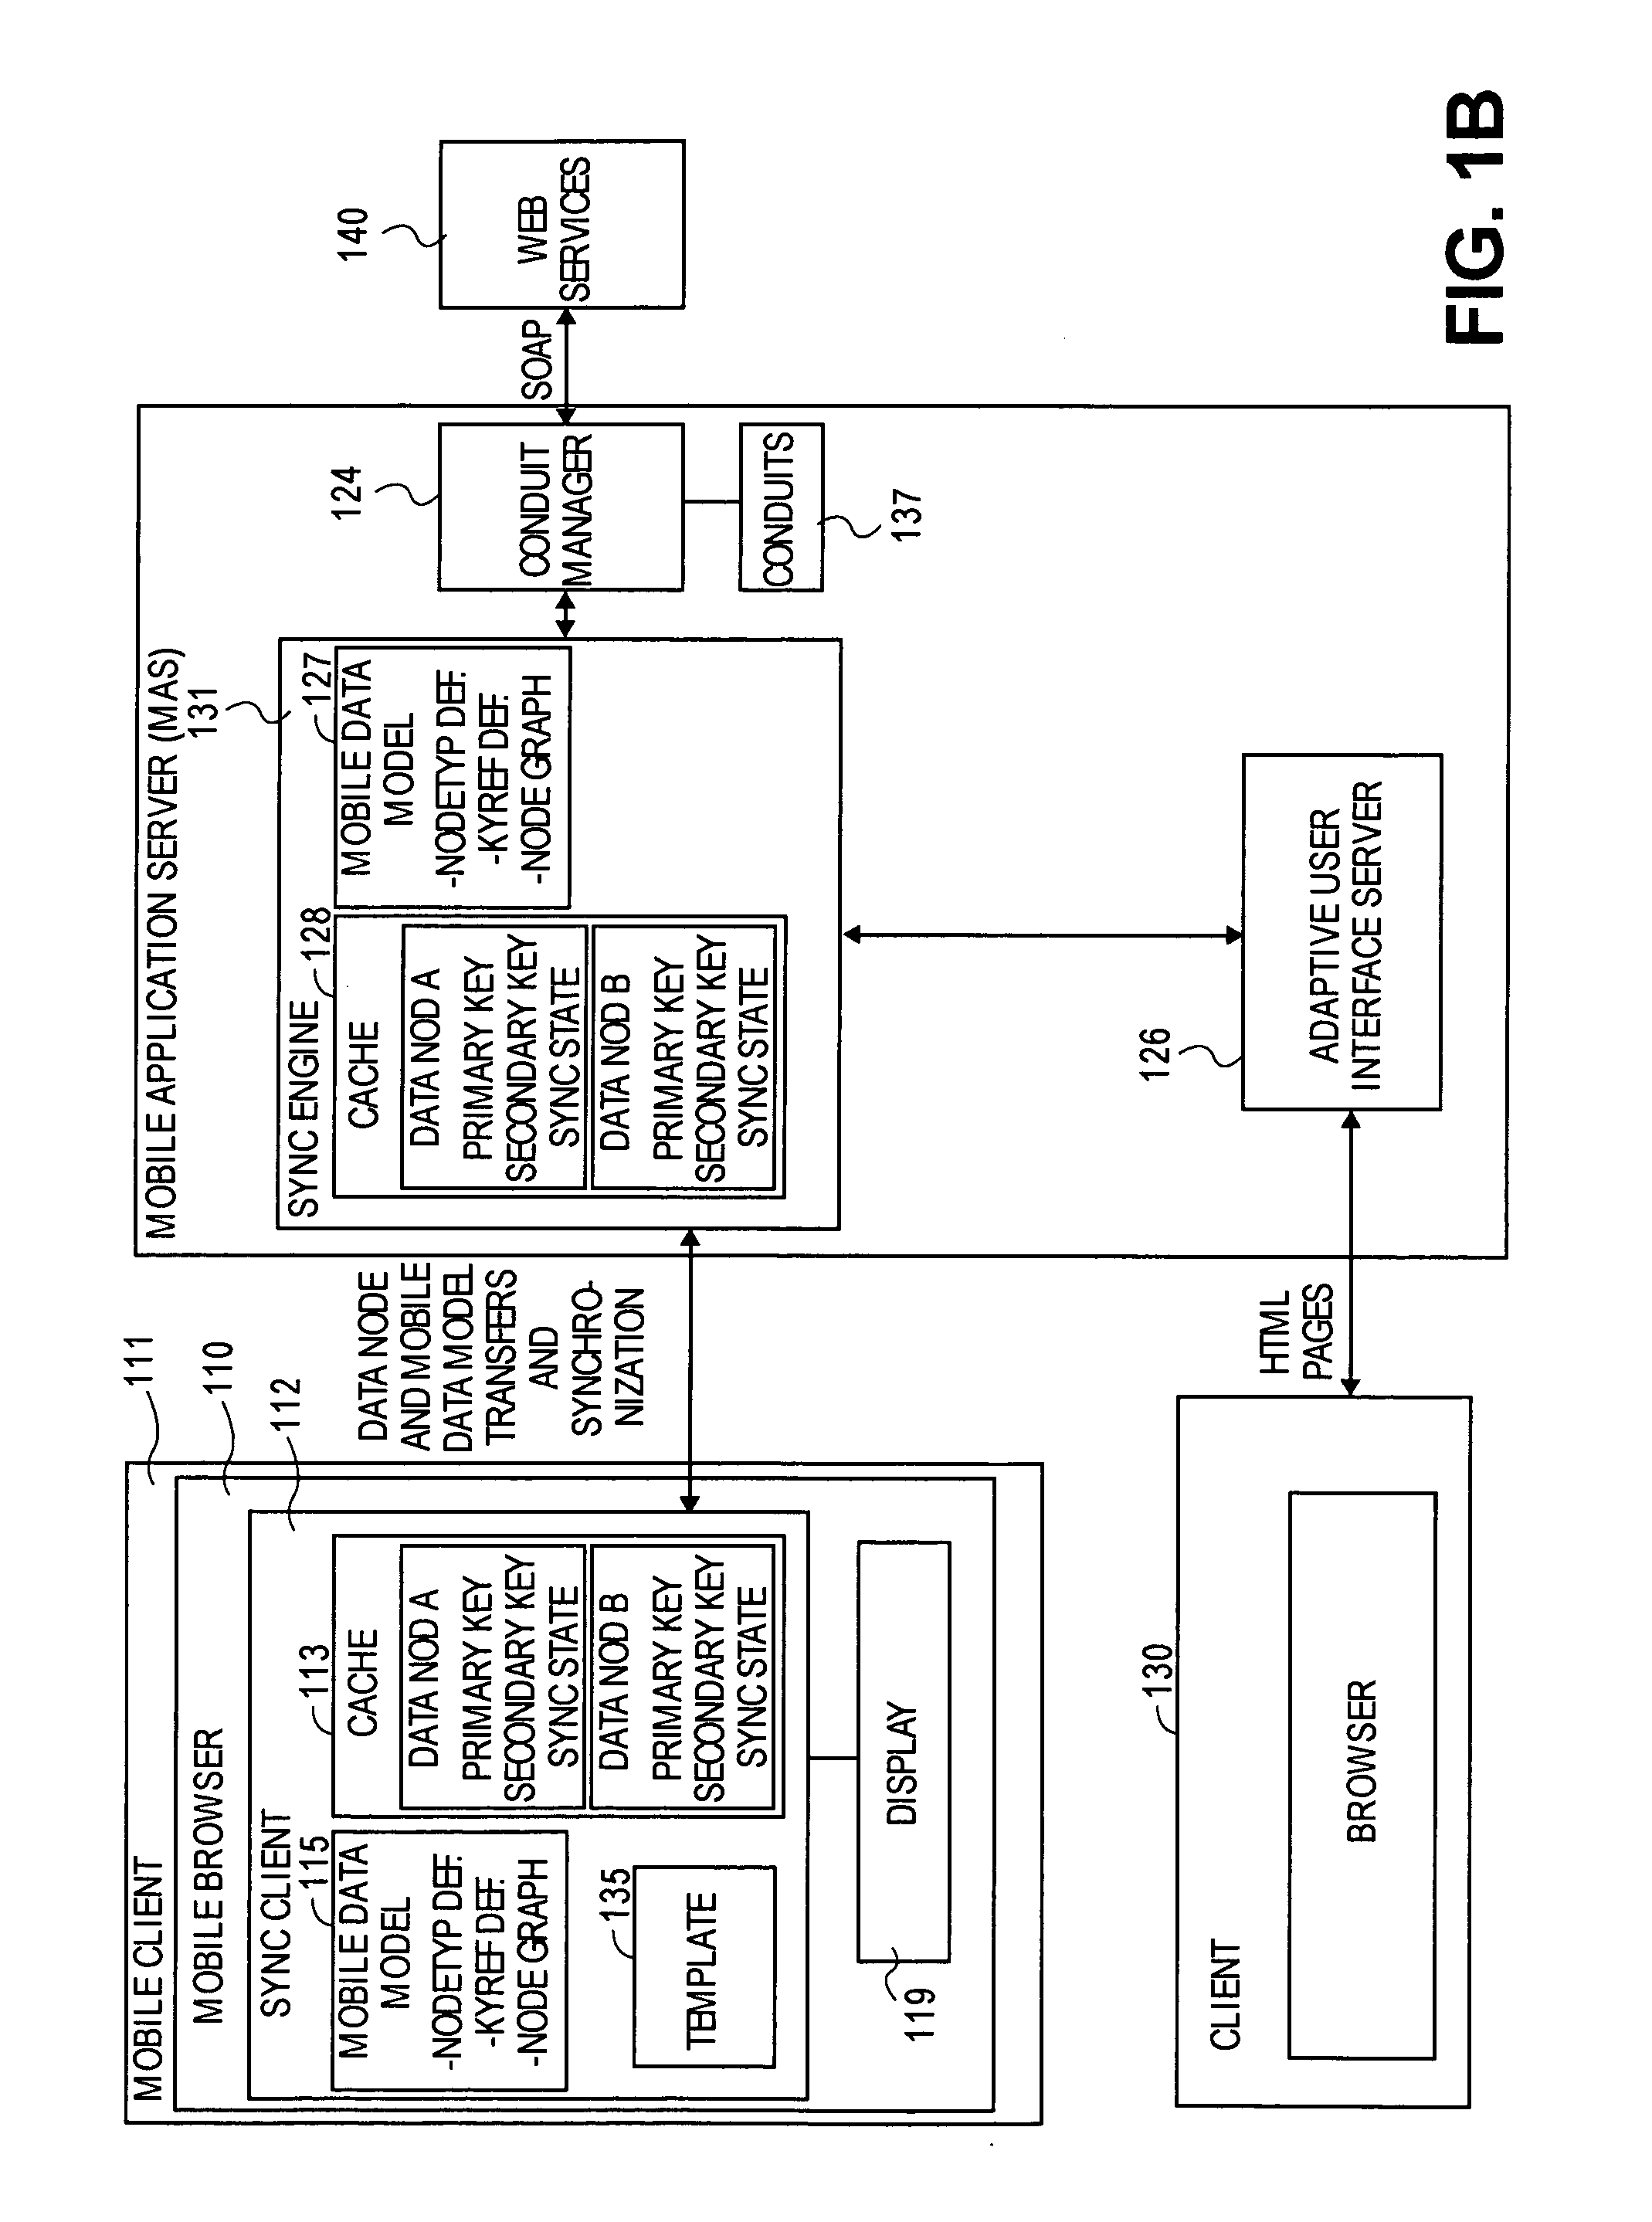 Data model for occasionally-connected application server